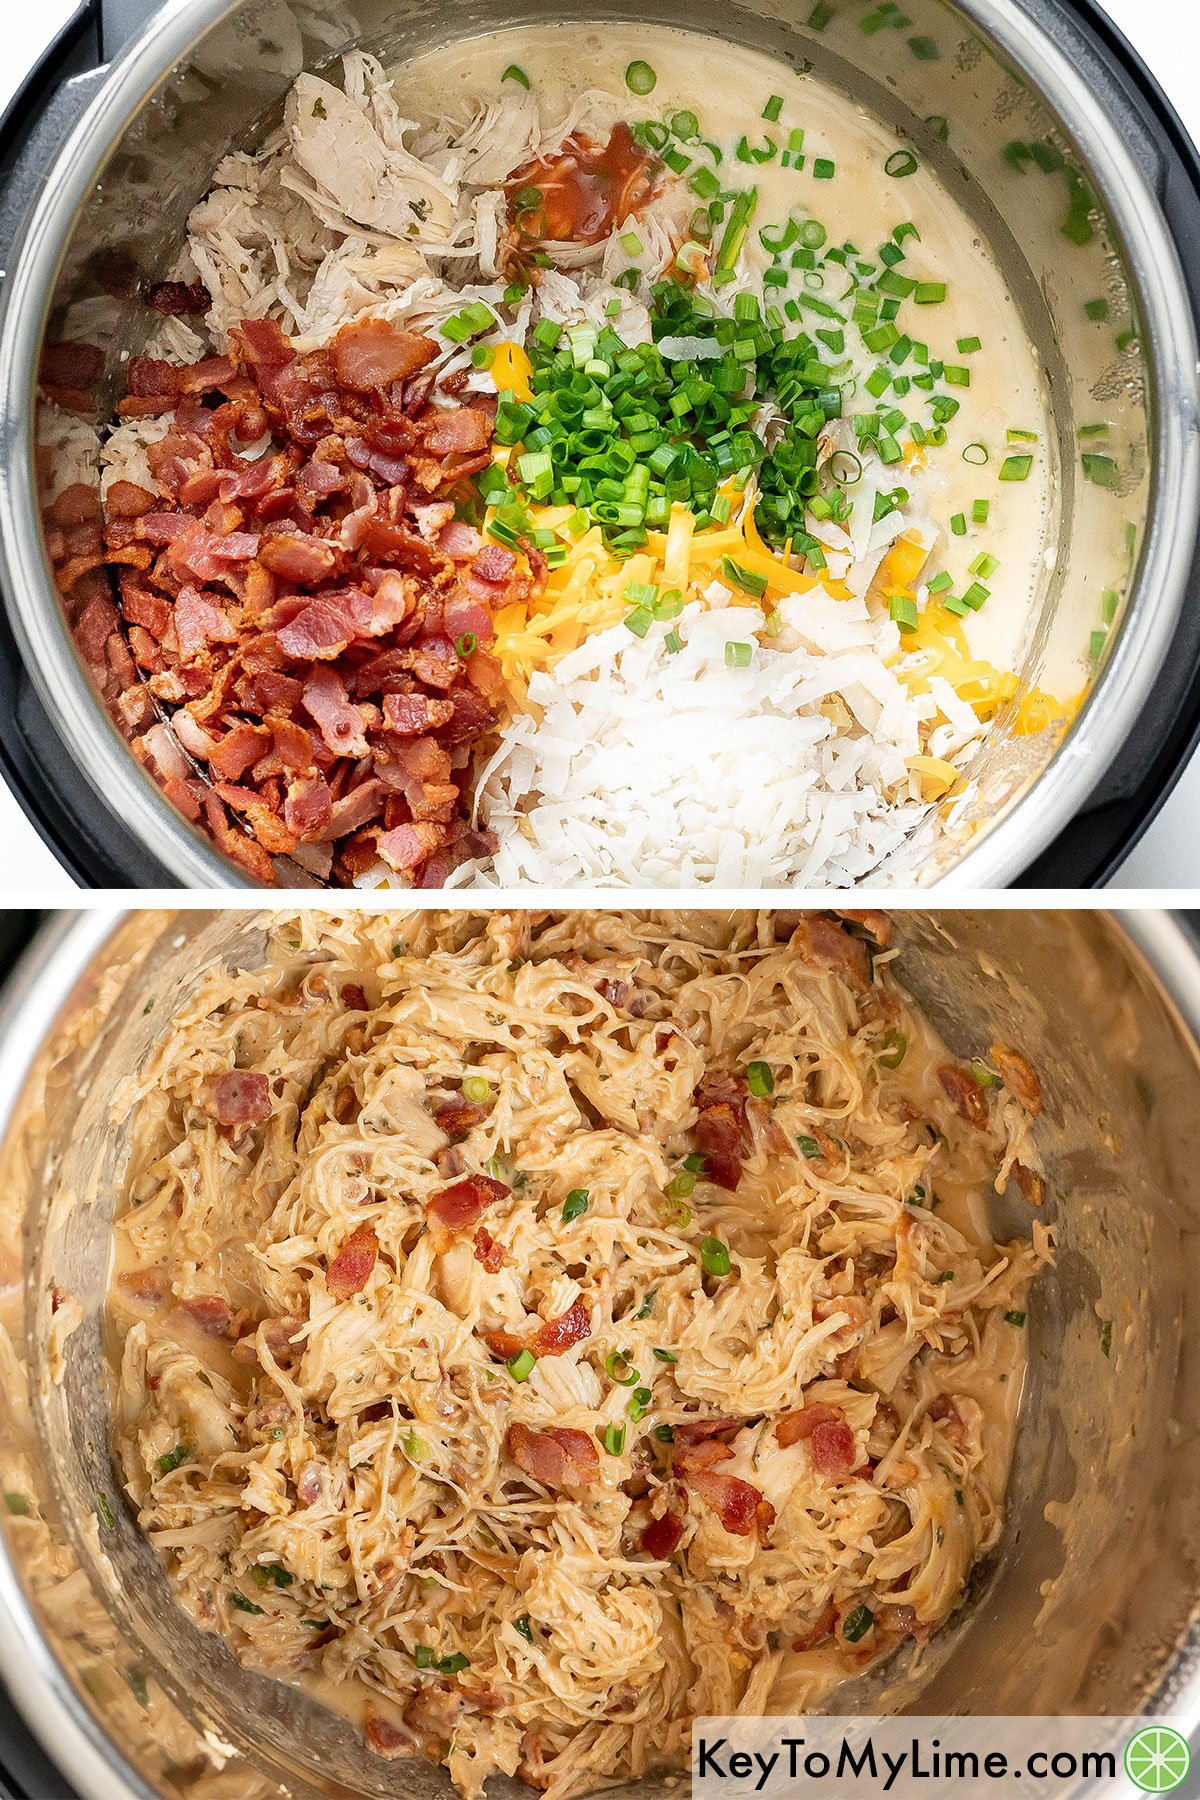 Adding shredded chicken, cooked bacon, cheddar, parmesan, and green onions to the Instant Pot.